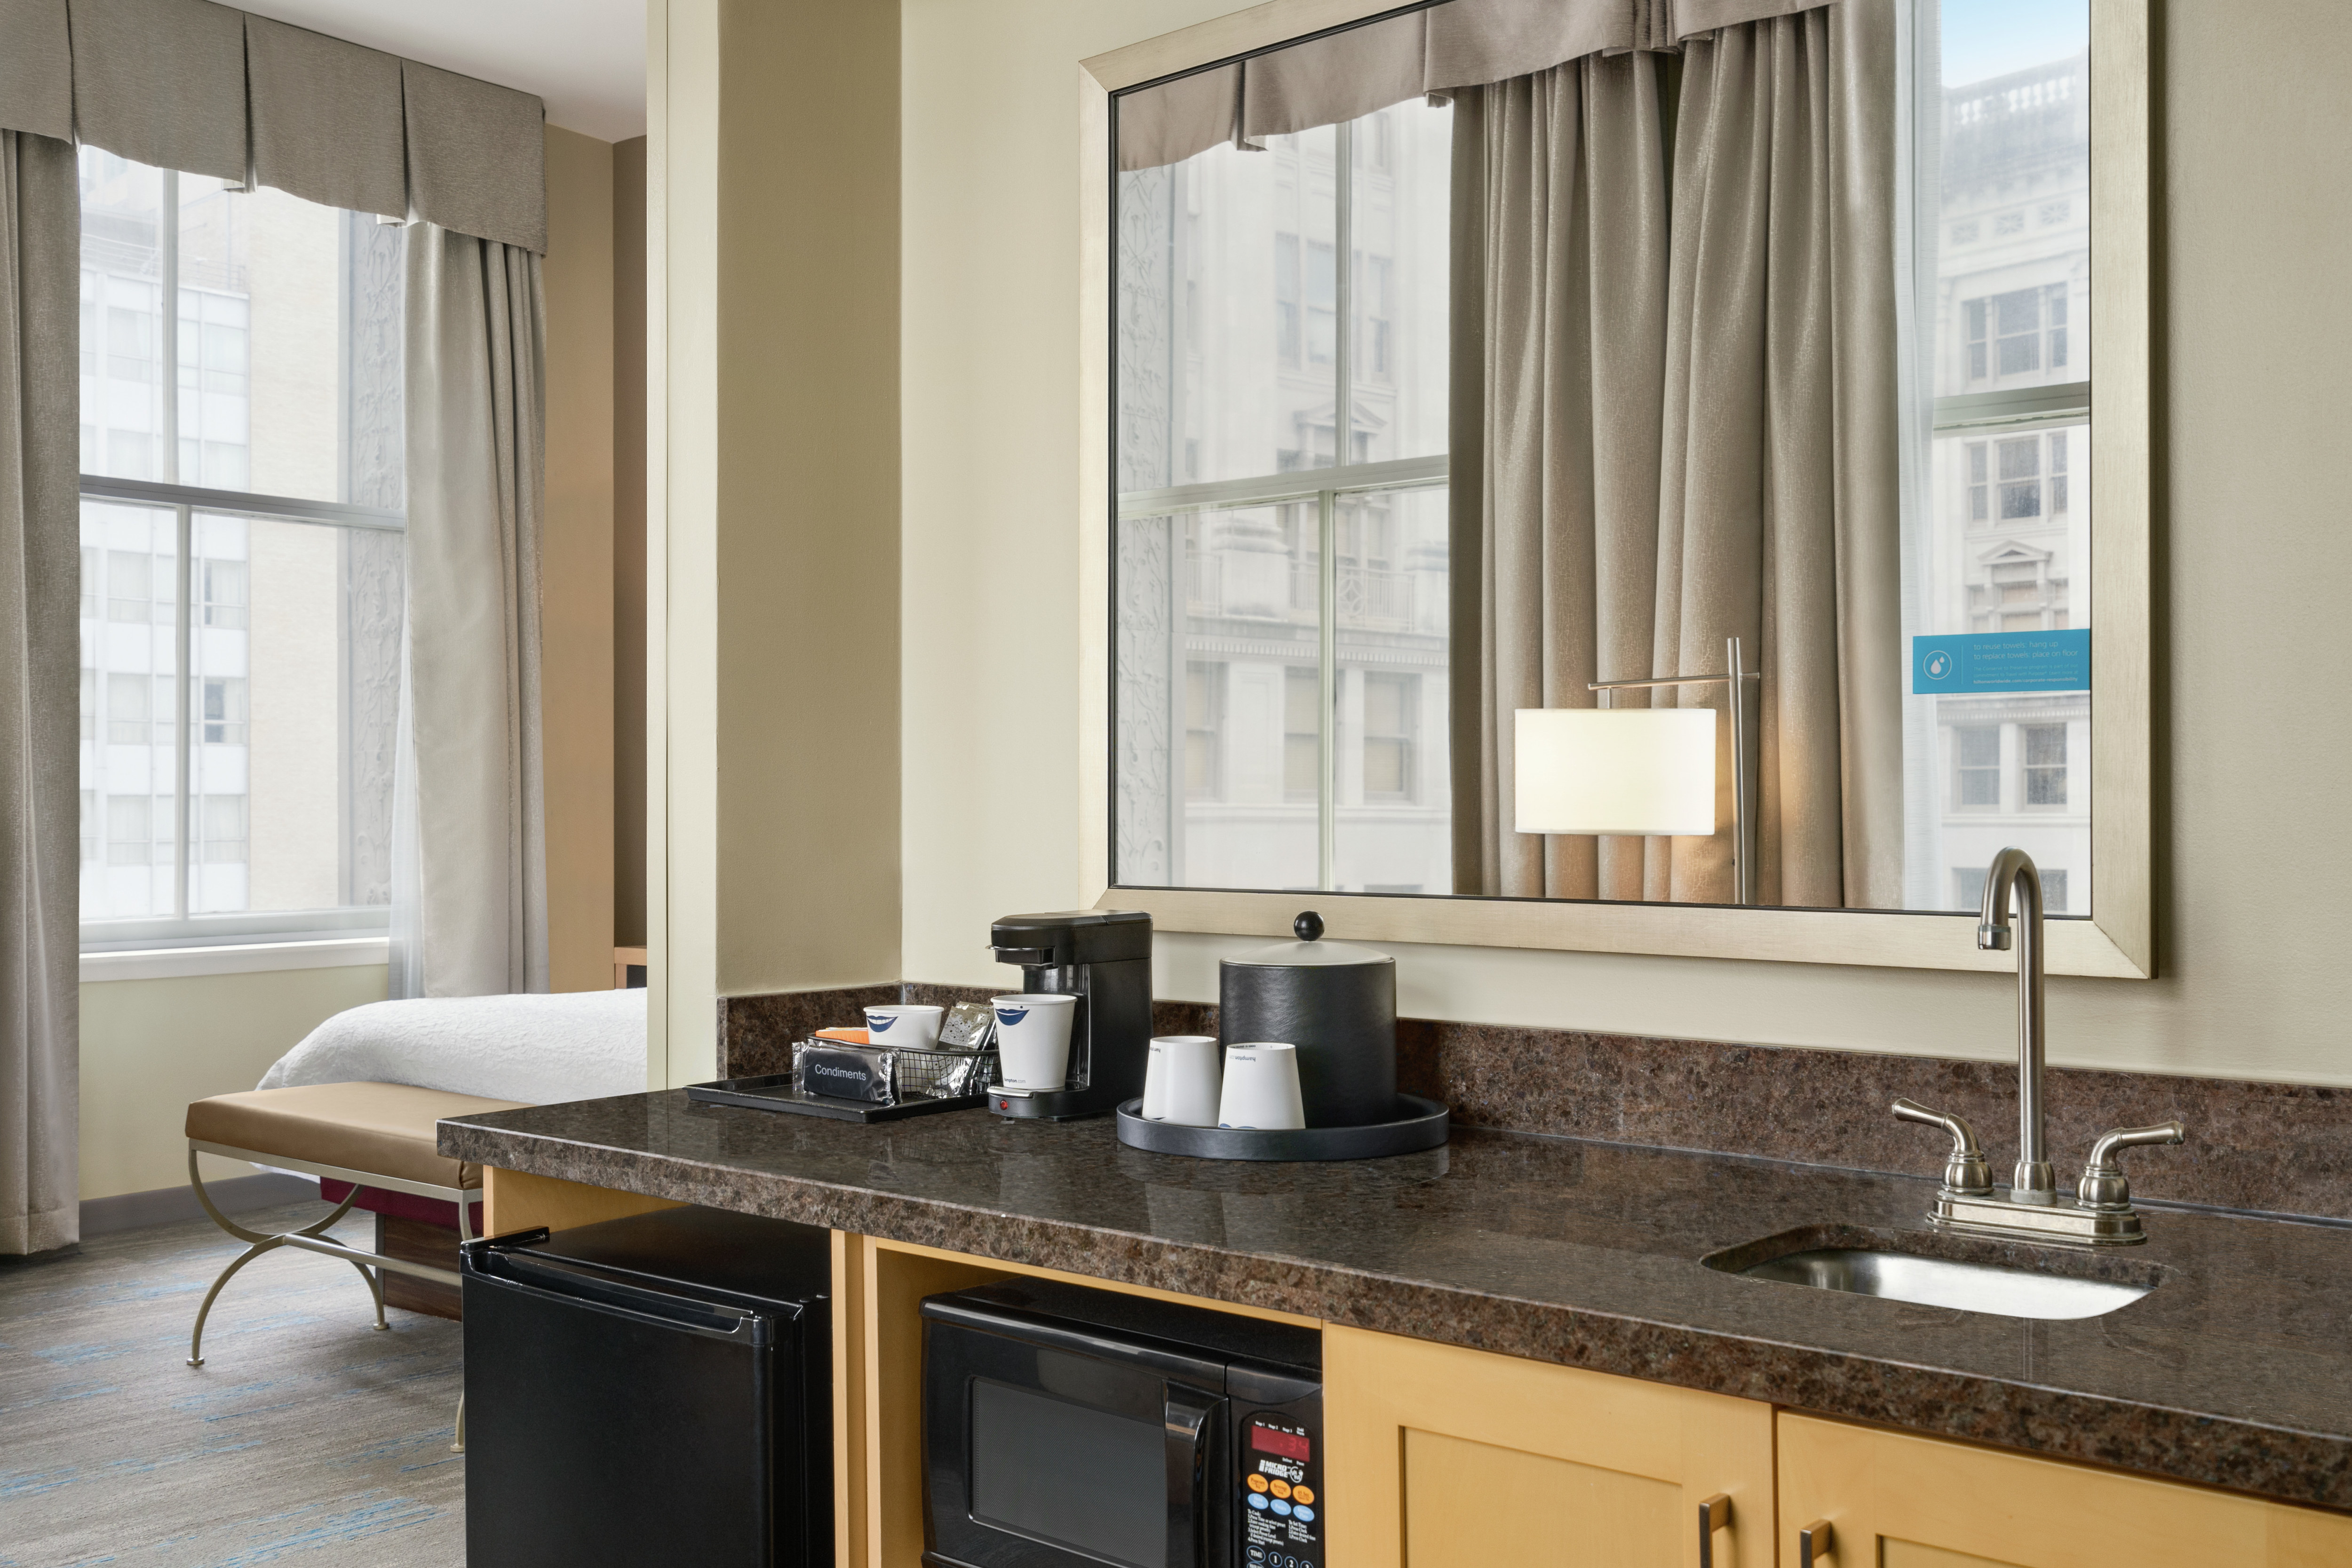 Convenient in-room wet bar featuring sink, mini-refrigerator, and microwave.